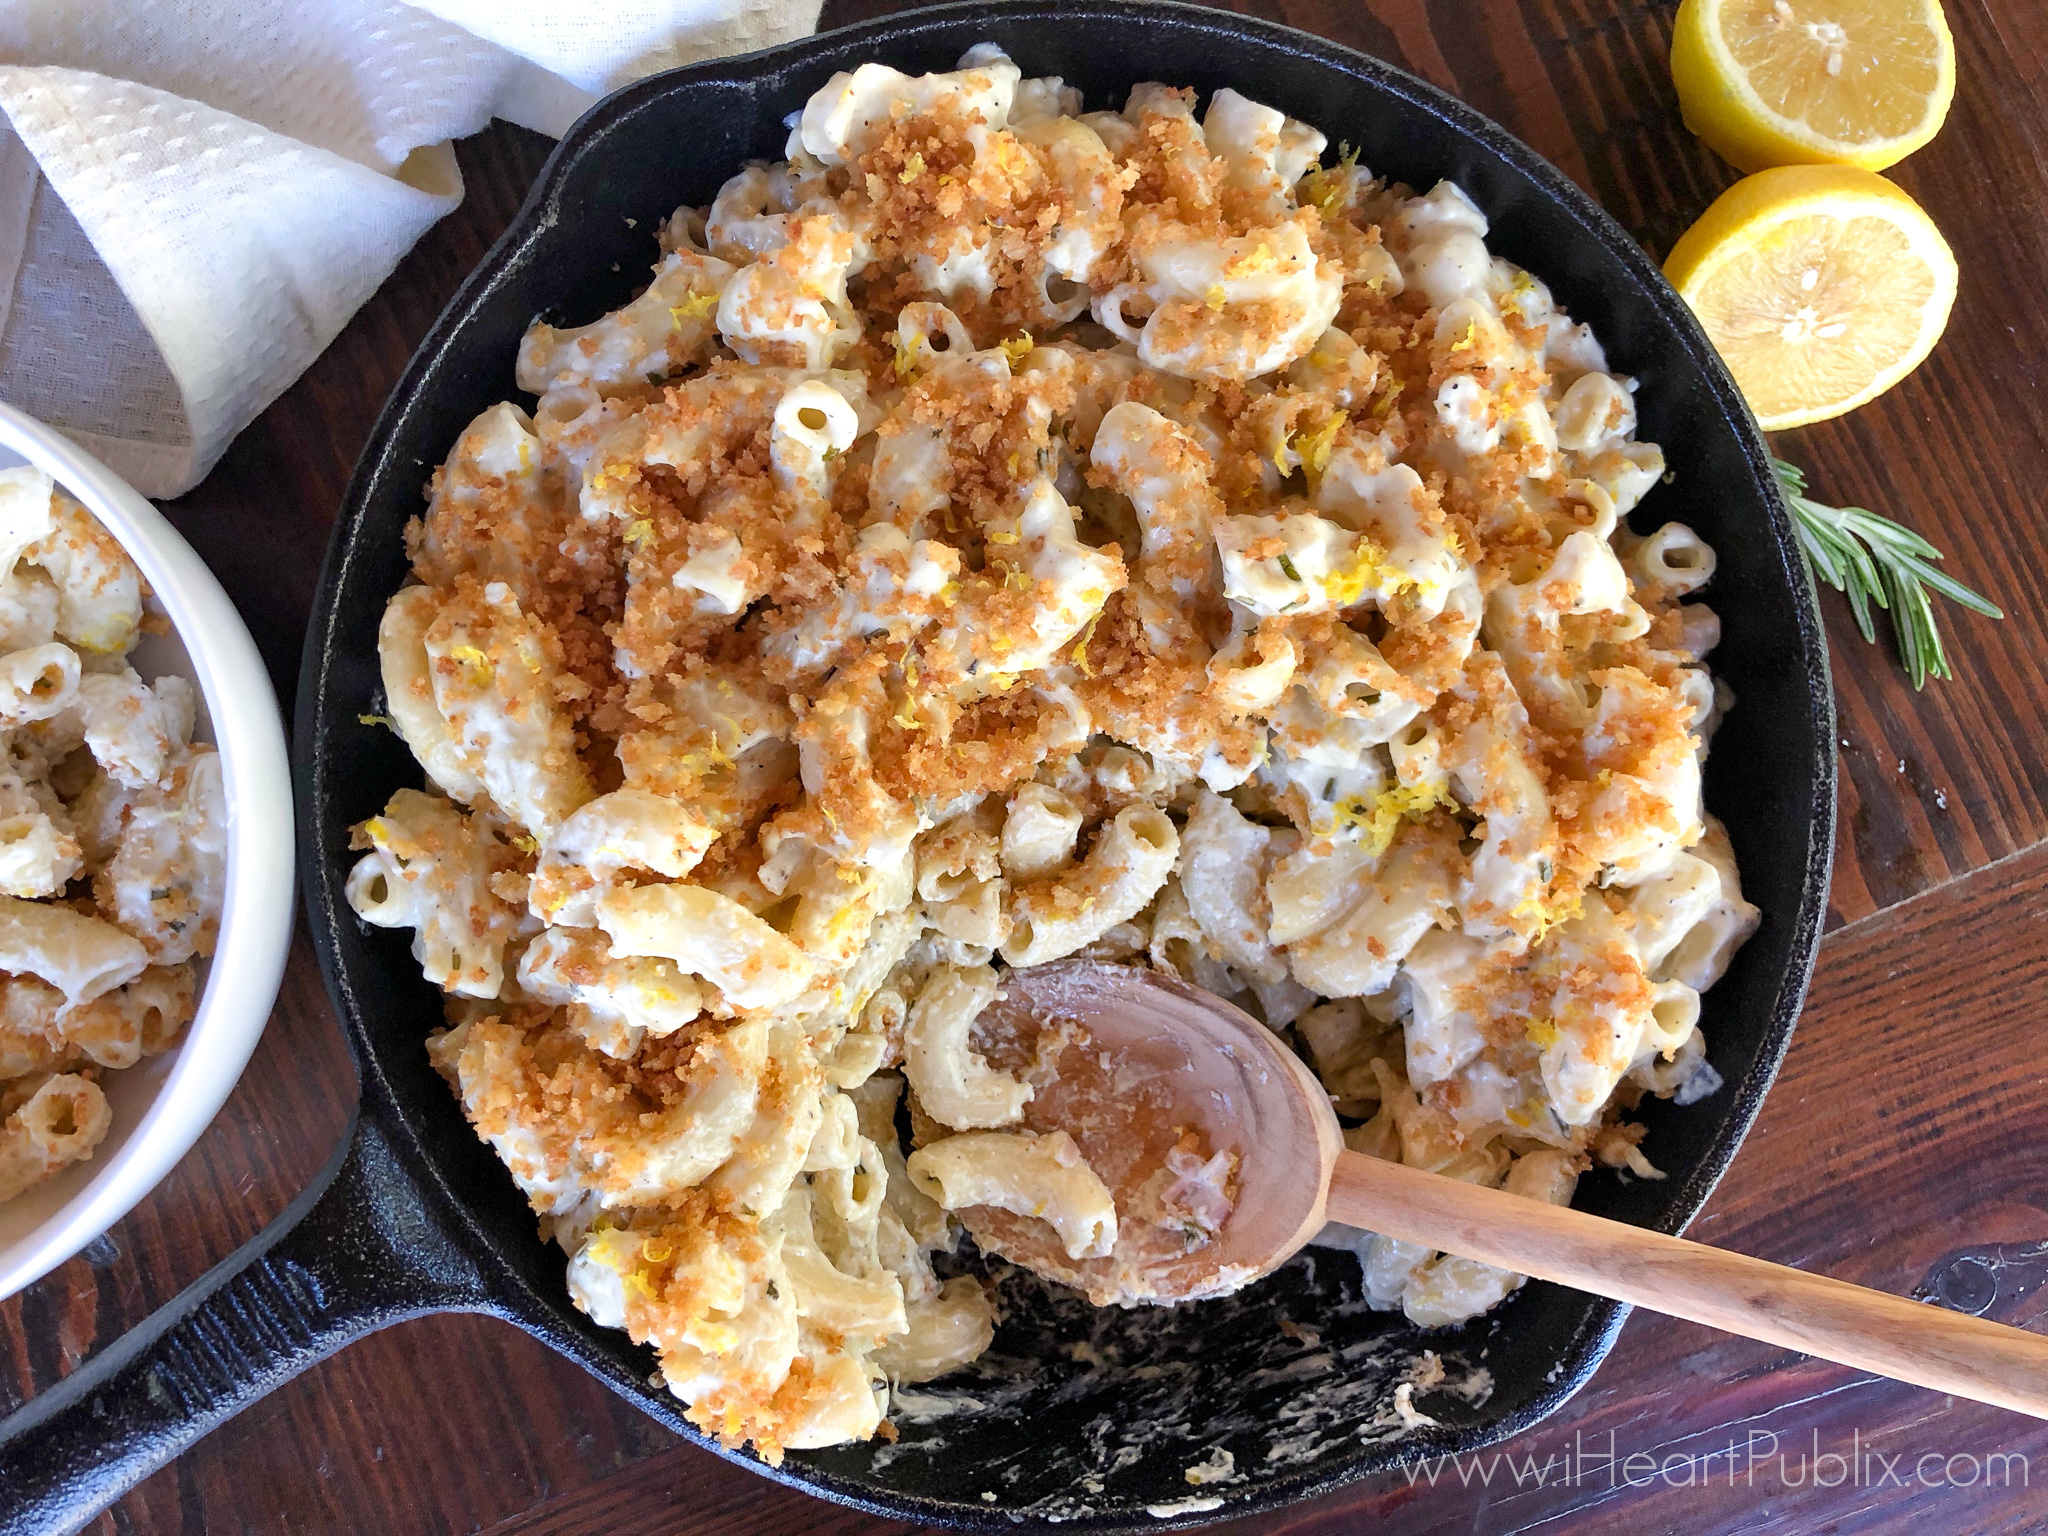 Ronzoni Pasta Is BOGO At Publix - Great Time To Make This Lemon and Rosemary Mac and Cheese on I Heart Publix